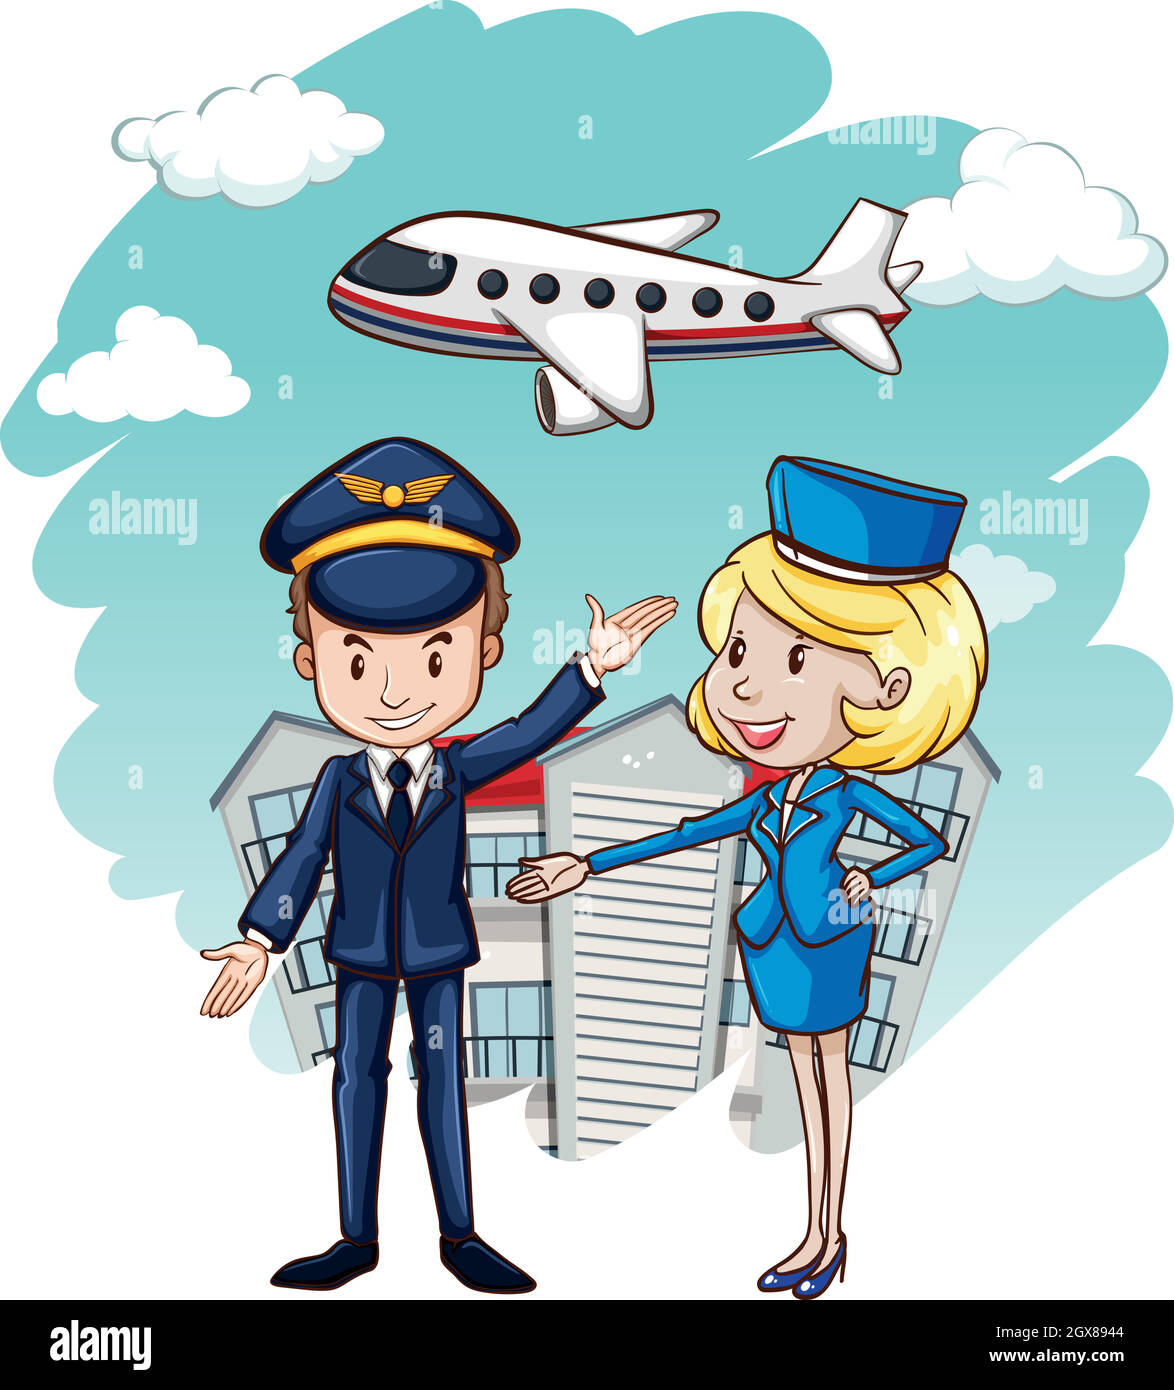 Pilot and flight attendant with airplane in background Stock Vector